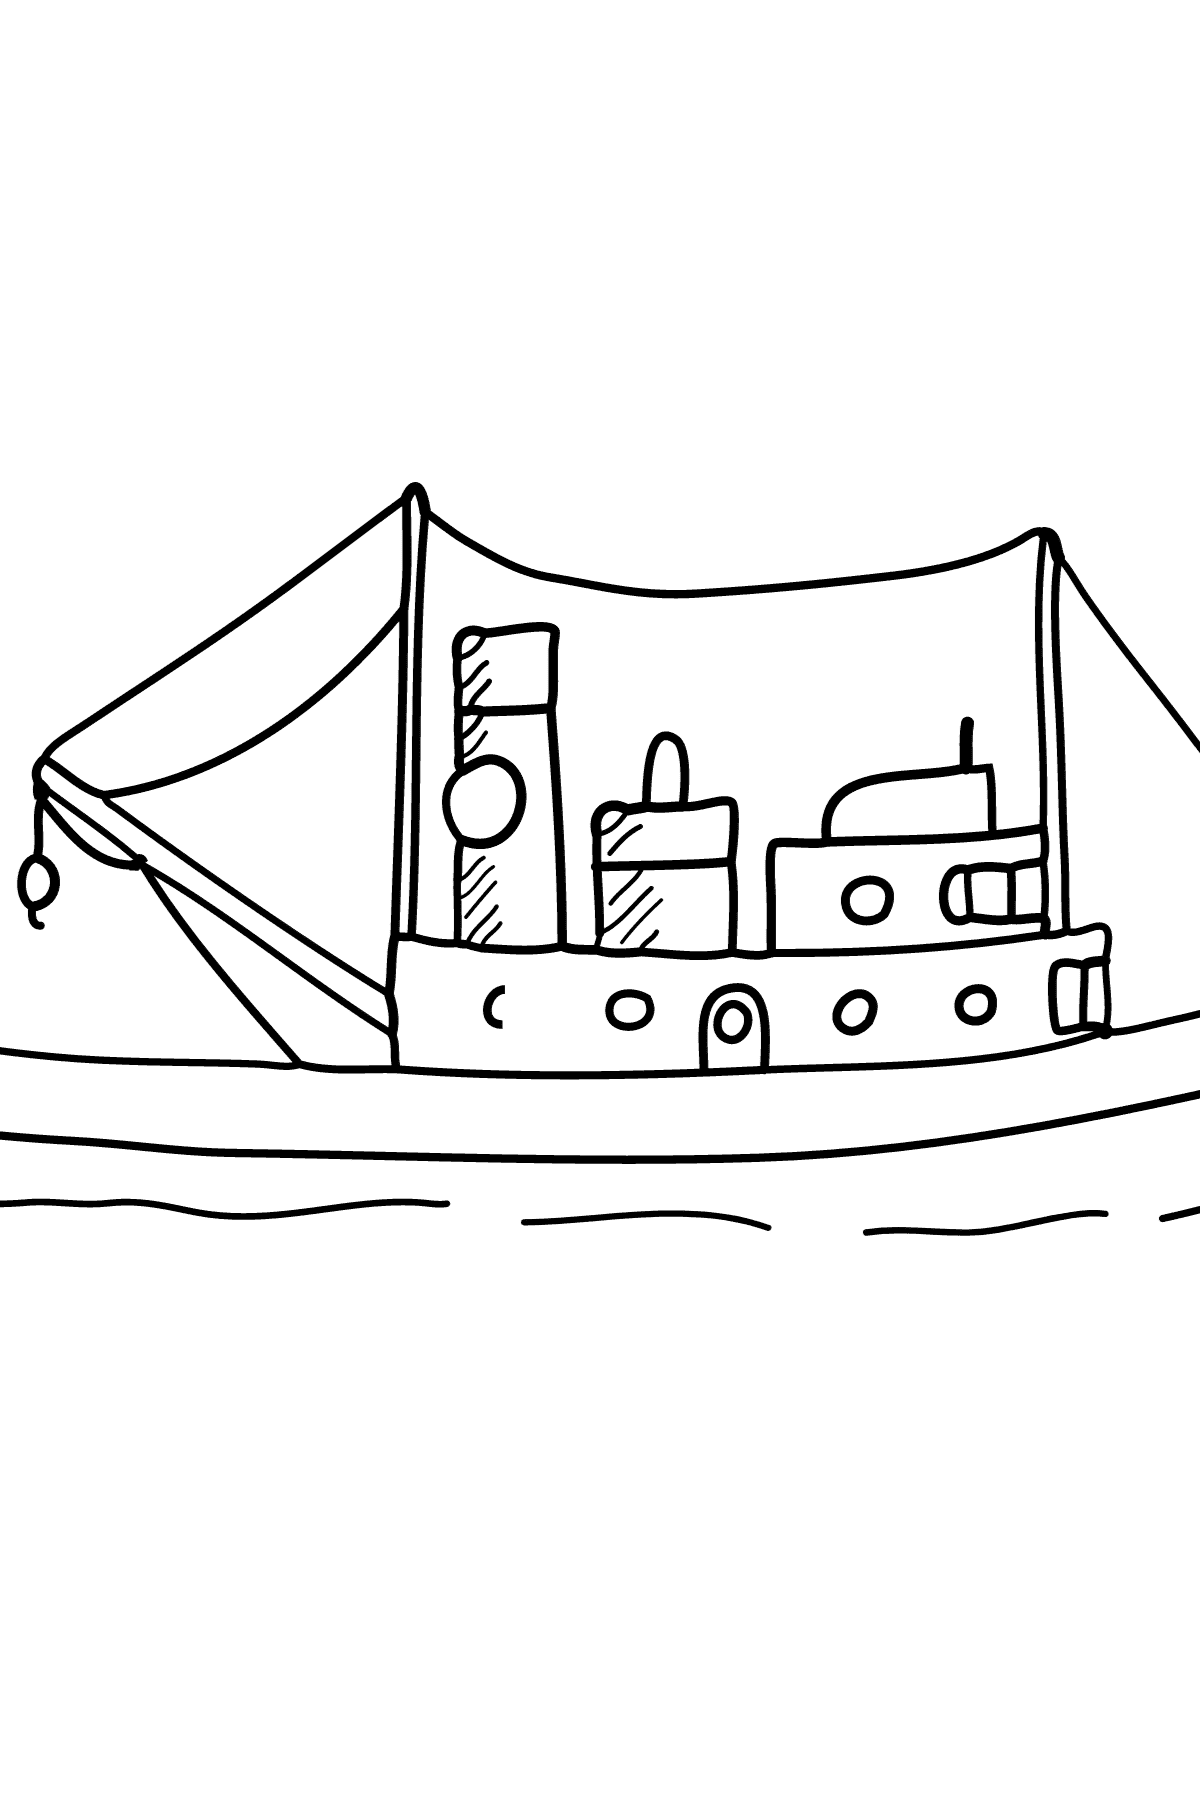 Coloring Page - A Cargo Ship - Coloring Pages for Children